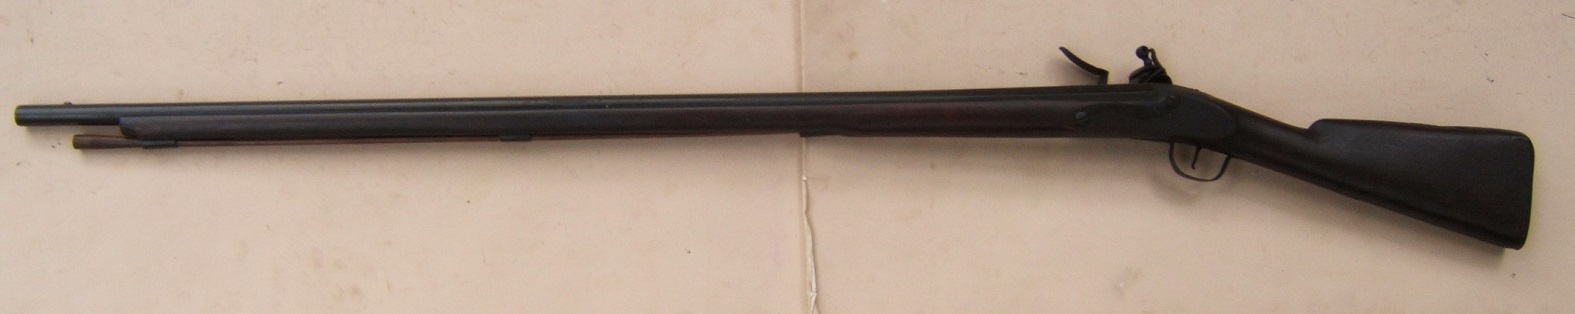 A FINE & SCARCE AMERICAN RESTOCKED FRENCH MODEL 1717/1728 MUSKET, ca. 1720/1785 view 2